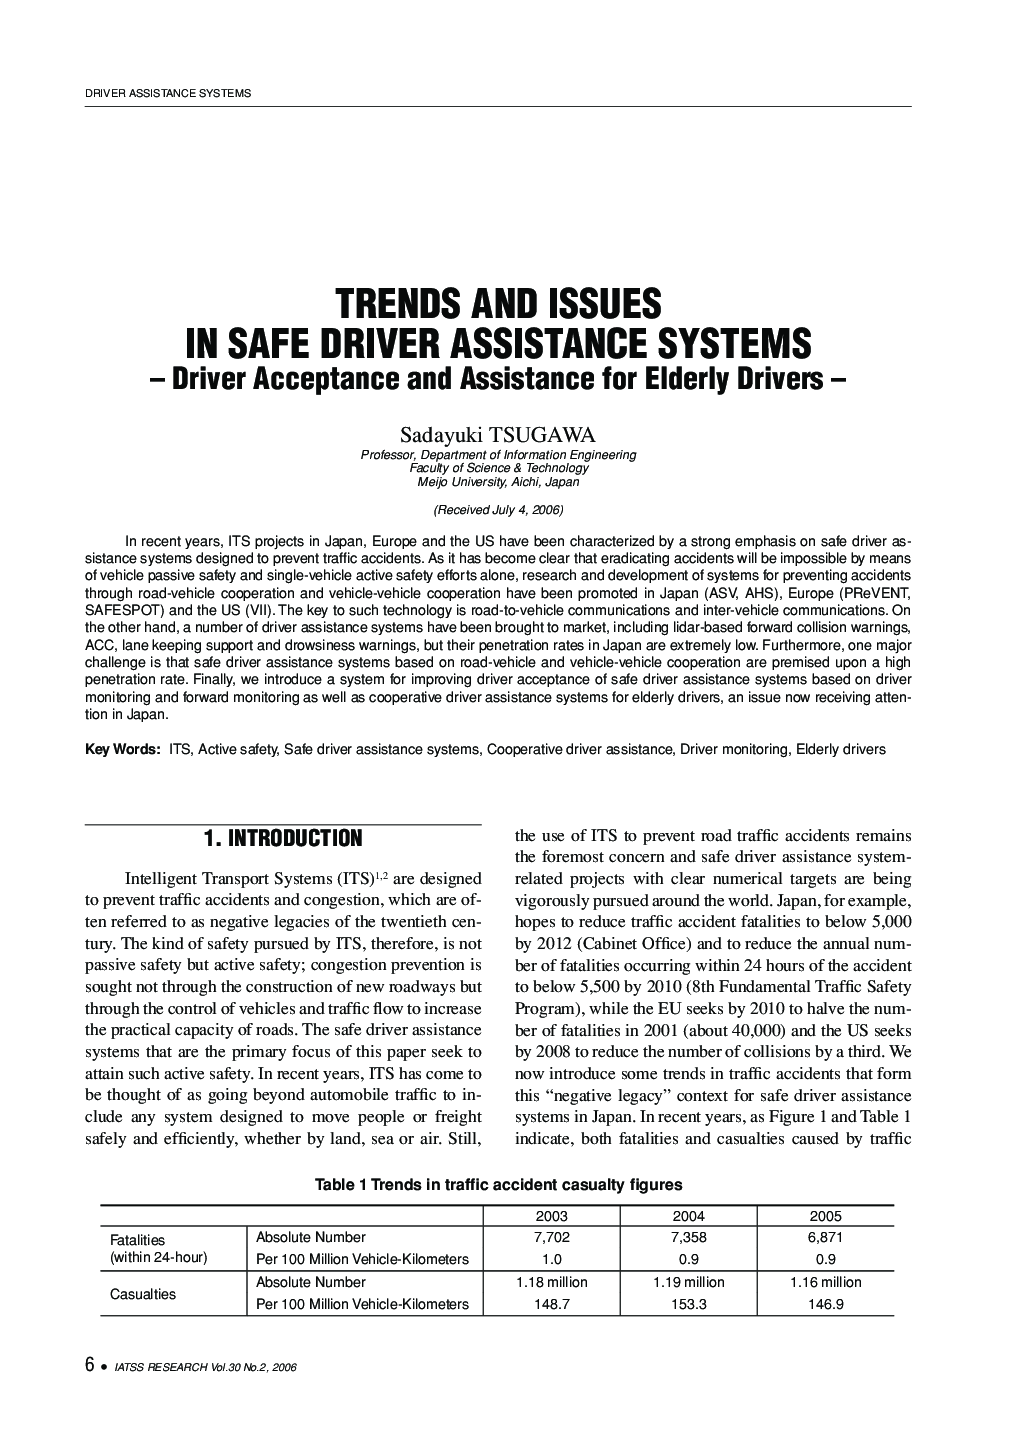 TRENDS AND ISSUES IN SAFE DRIVER ASSISTANCE SYSTEMS: Driver Acceptance and Assistance for Elderly Drivers